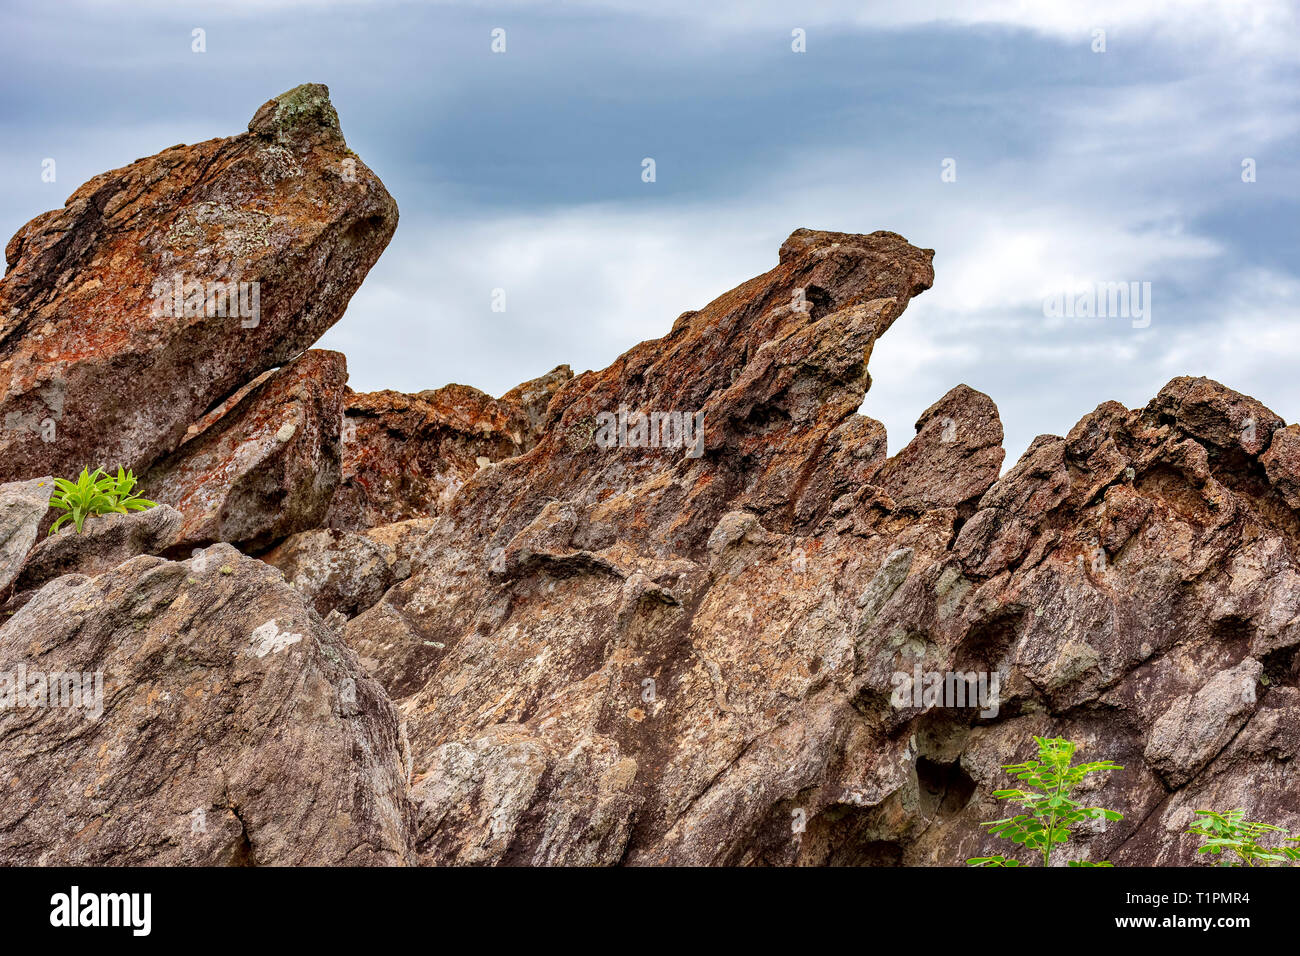 Rock formations between the mountains of Nova Lima in the state of Minas Gerais, Brazil Stock Photo